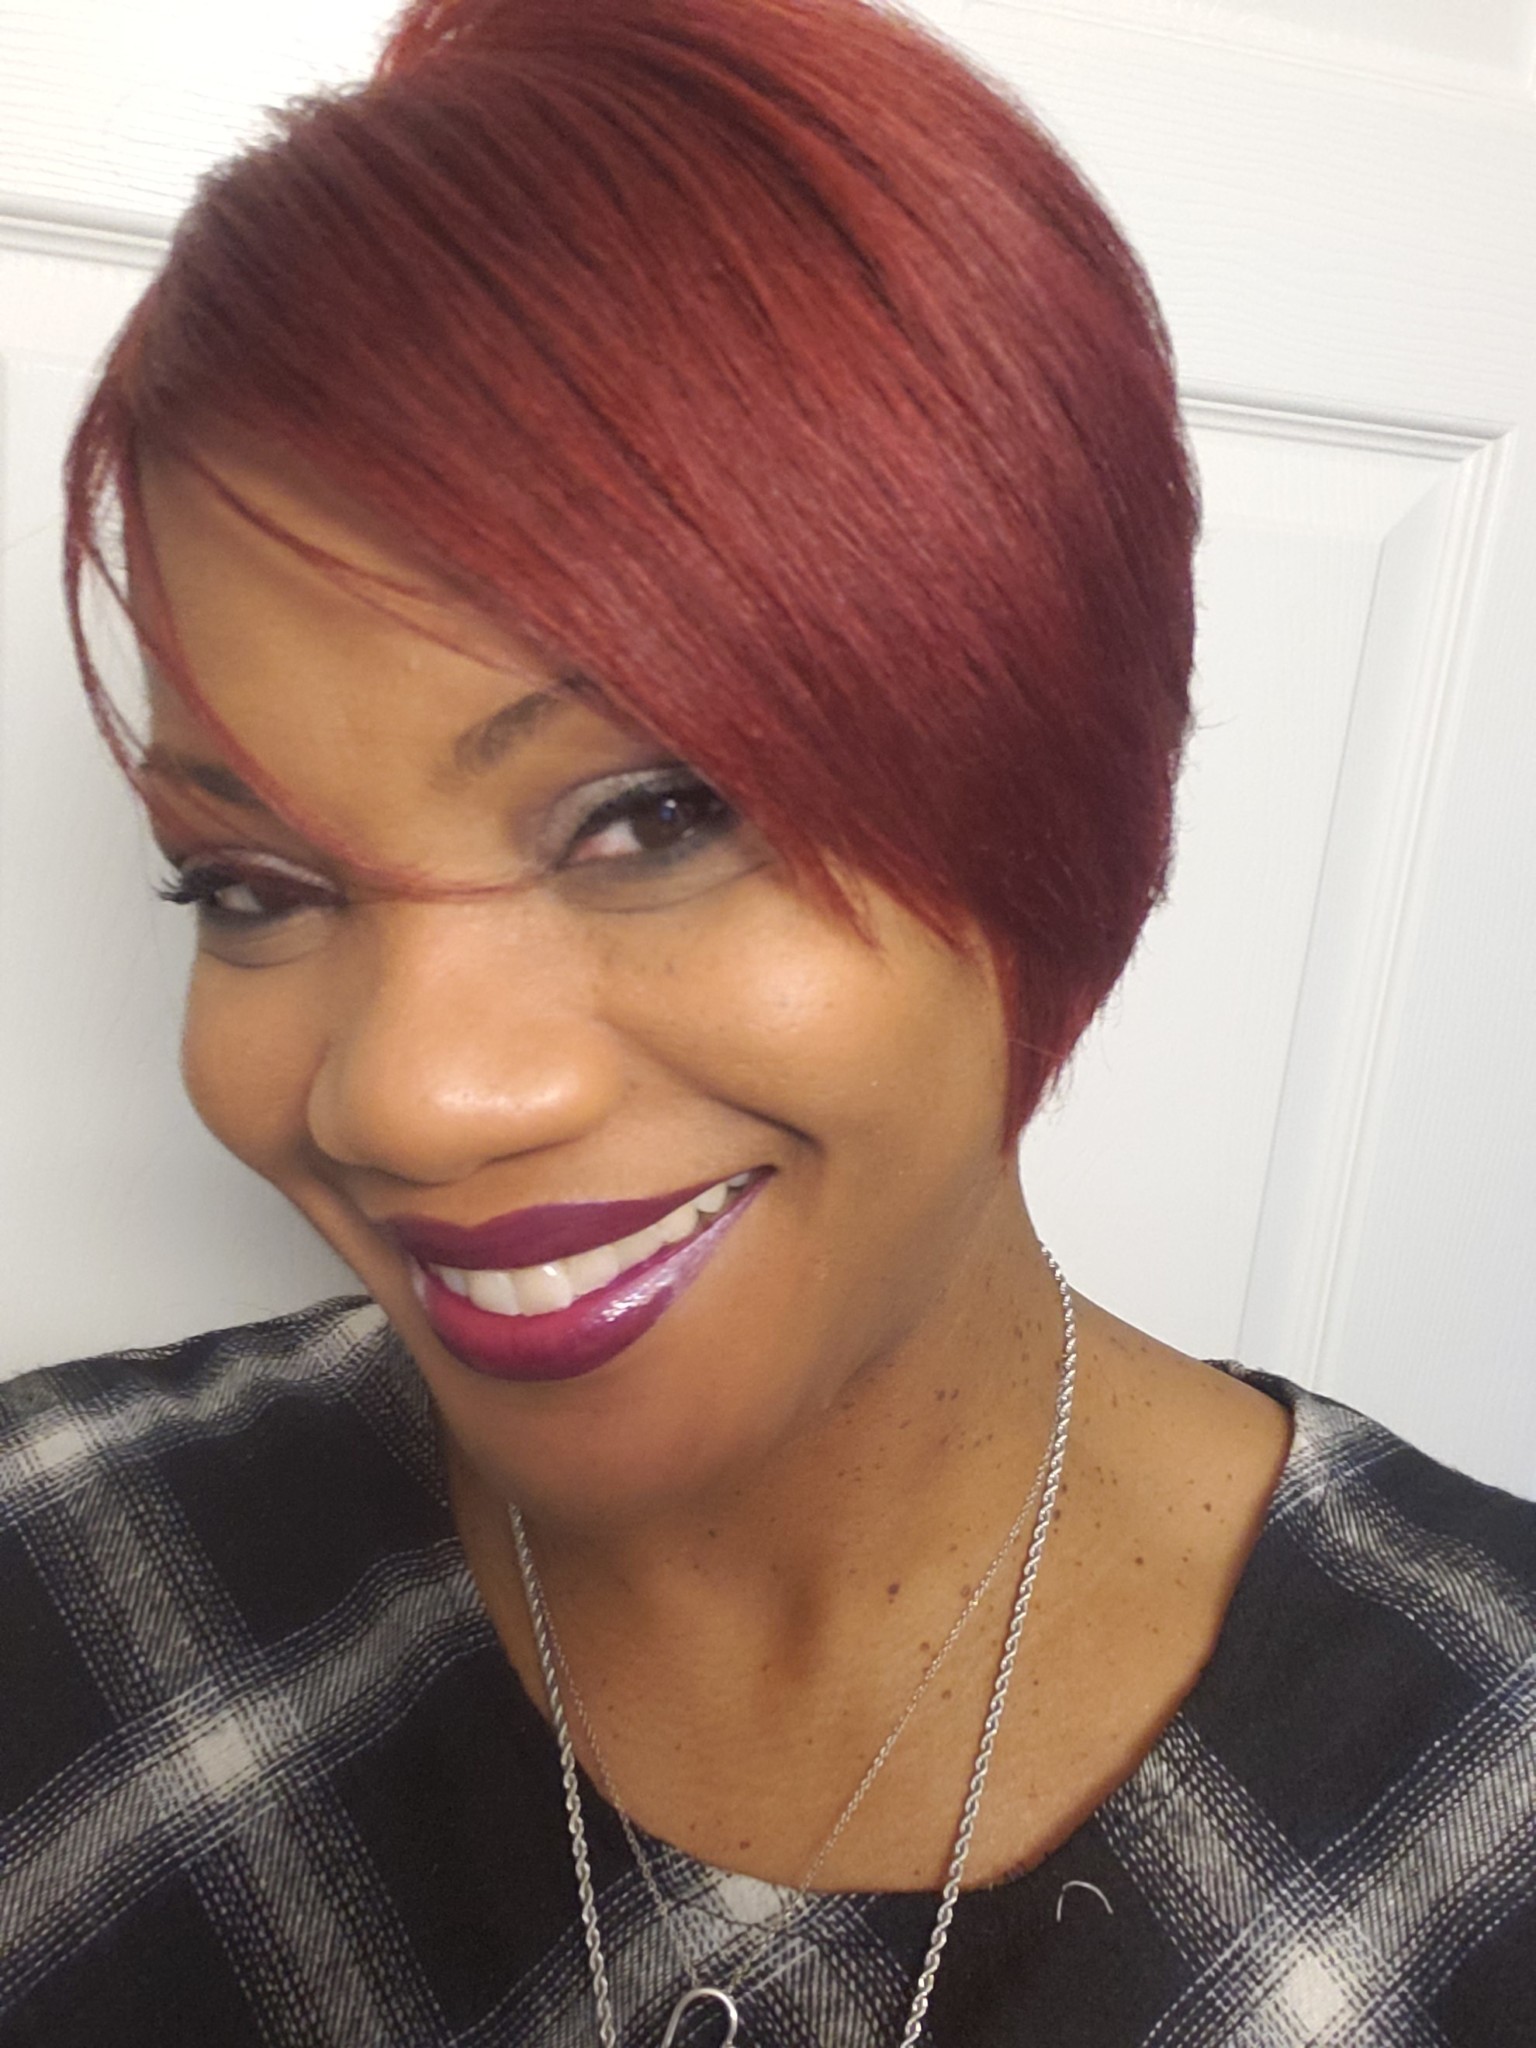 Ashro Woman of the Week Karen a smiling African-American woman wearing a black plaid blouse and has red hair.